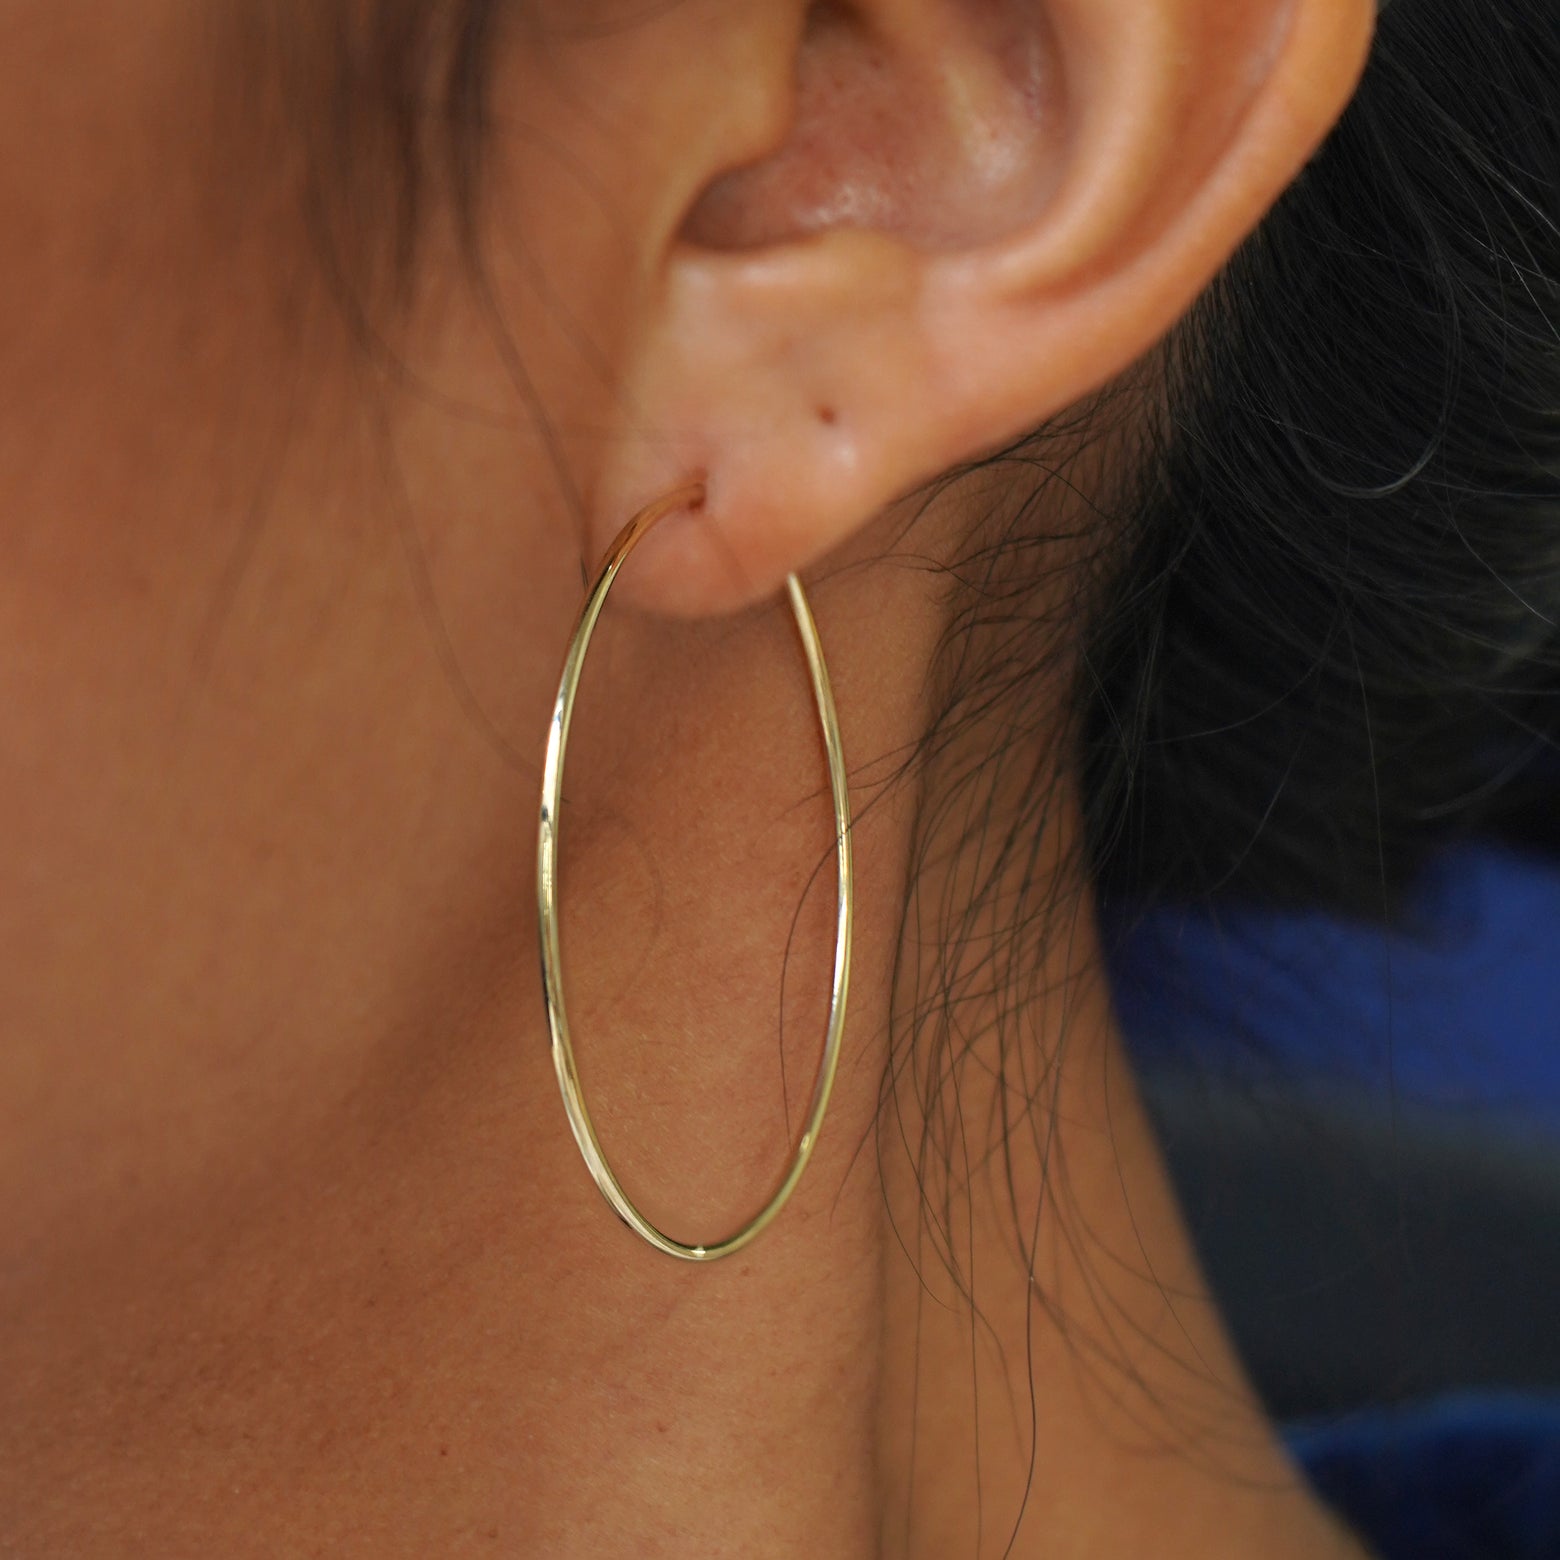 Close up view of a model's ear wearing a yellow gold Small Endless Hoop Earring